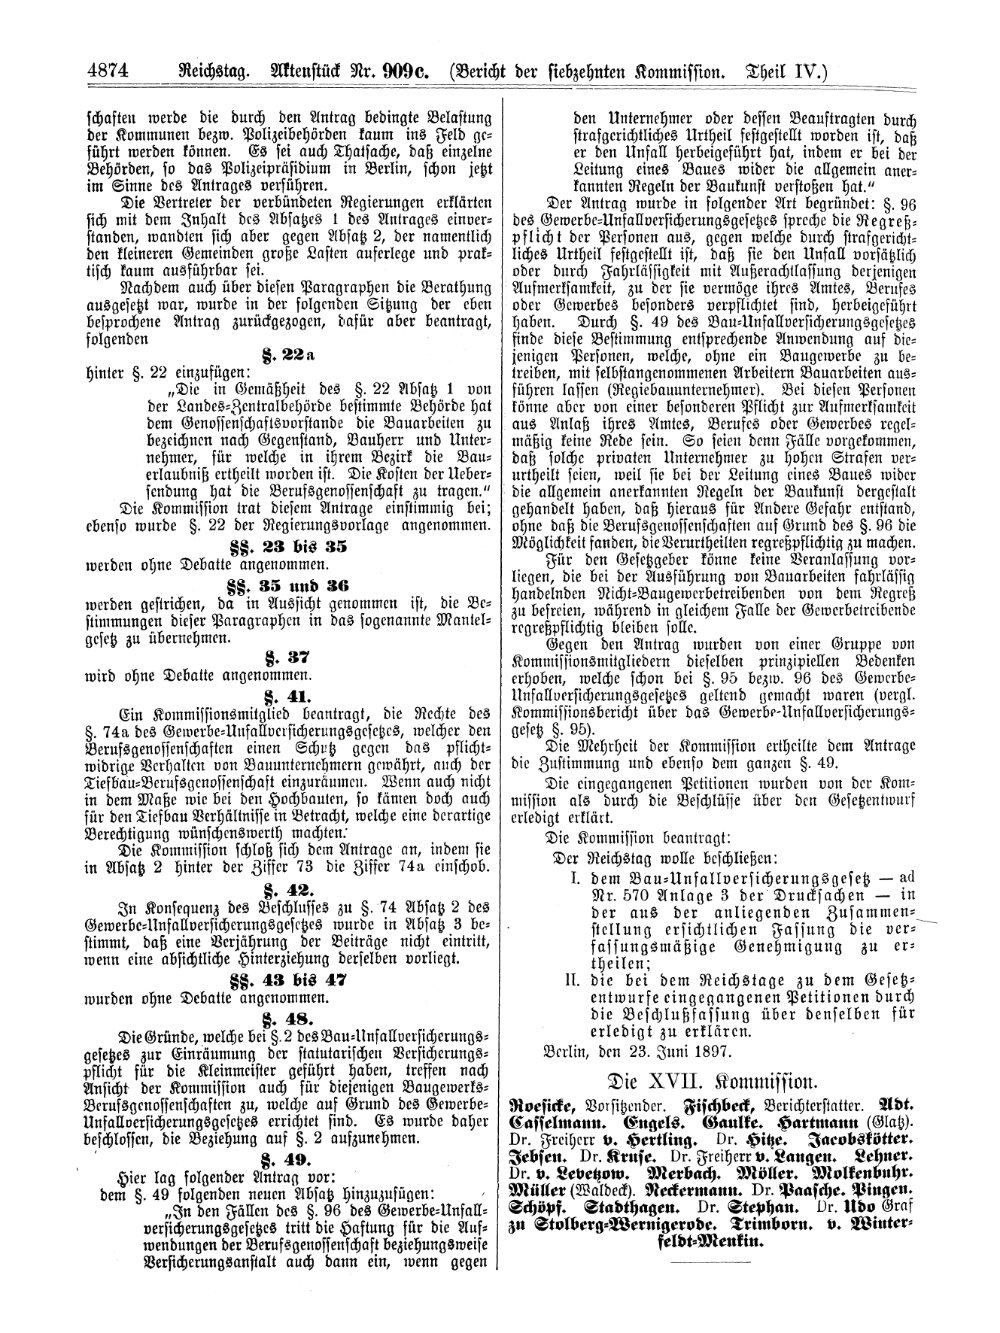 Scan of page 4874